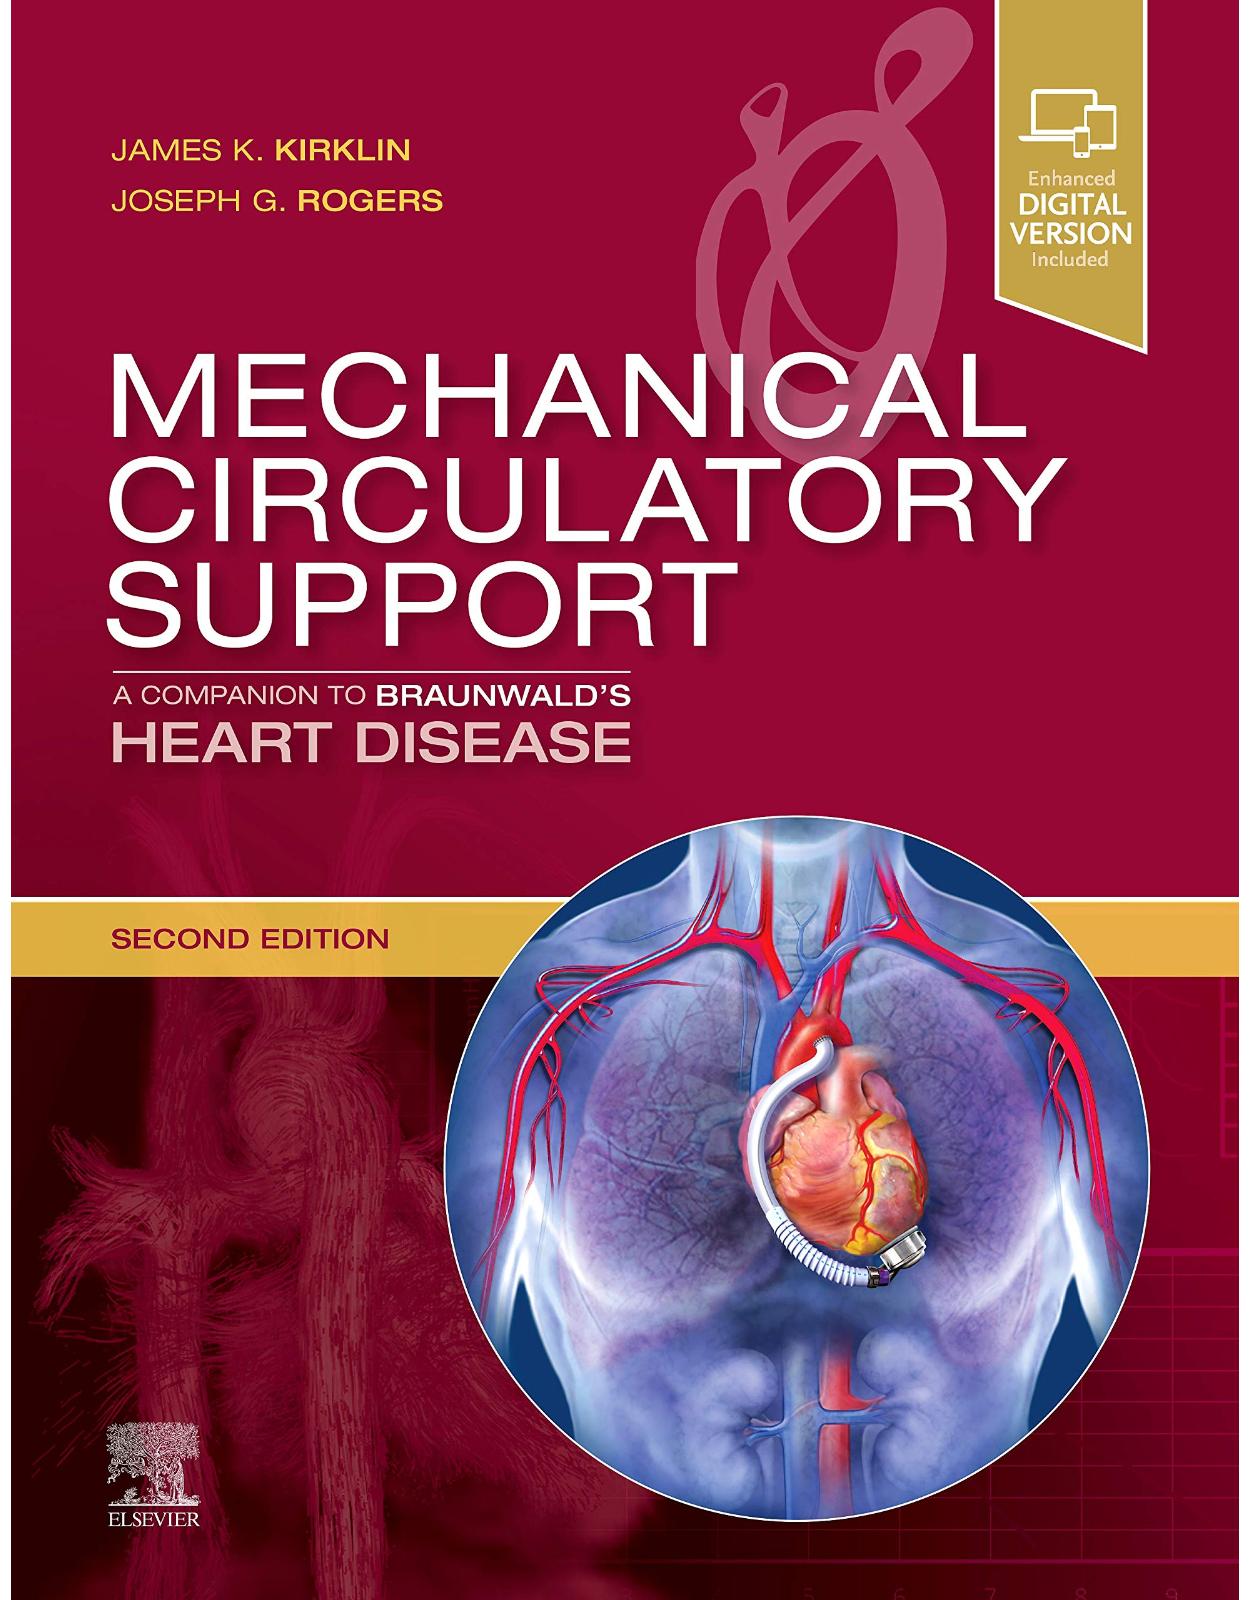 Mechanical Circulatory Support: A Companion to Braunwald’s Heart Disease: Expert Consult: Online and Print